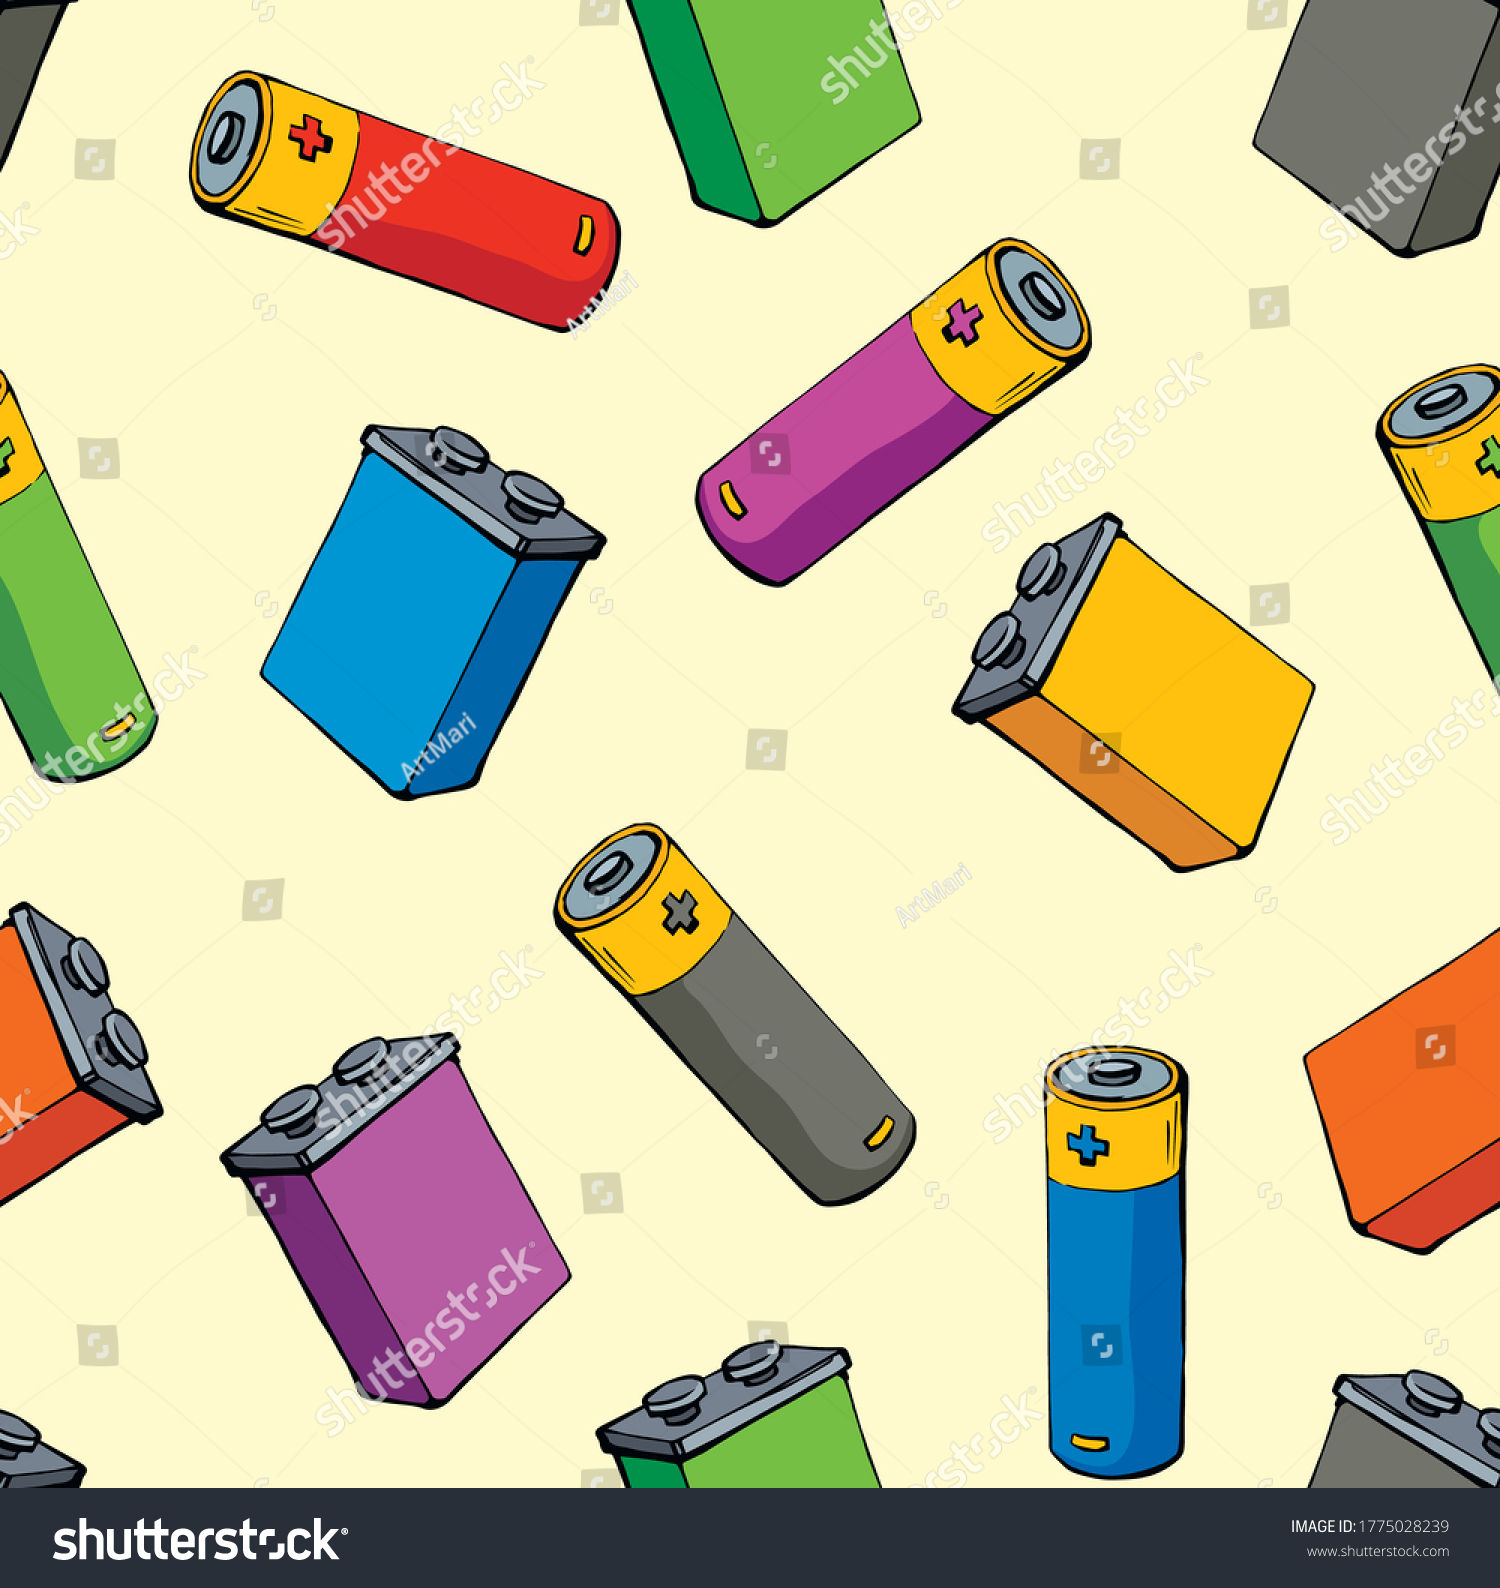 Modern auto engine chemical lithium polarity cylinder component. Light yellow fond. Bright multy color hand drawn pole recycling object logo pictogram concept. Modern art doodle cartoon tileable style #1775028239